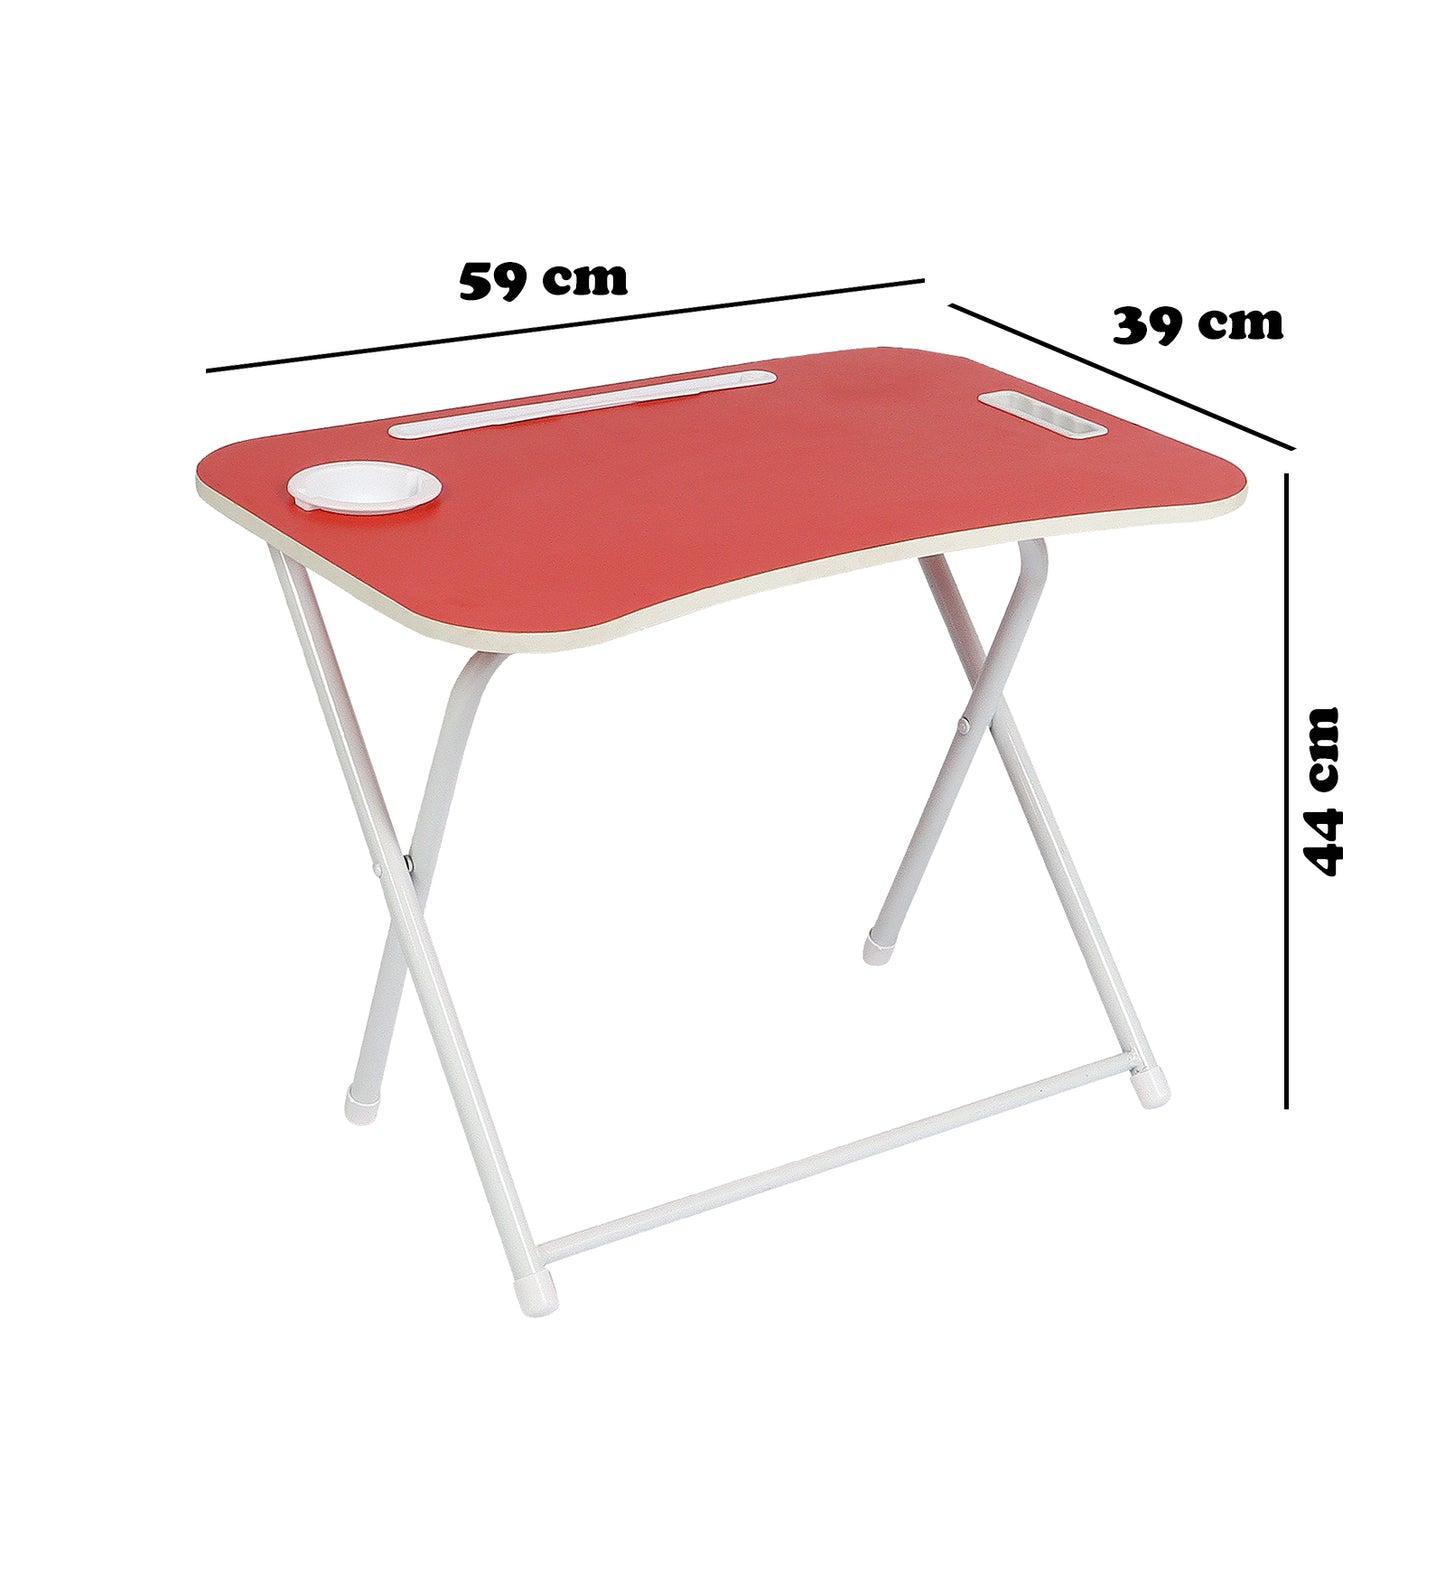 Foldable Table Chair Set Red (3-6 yrs)